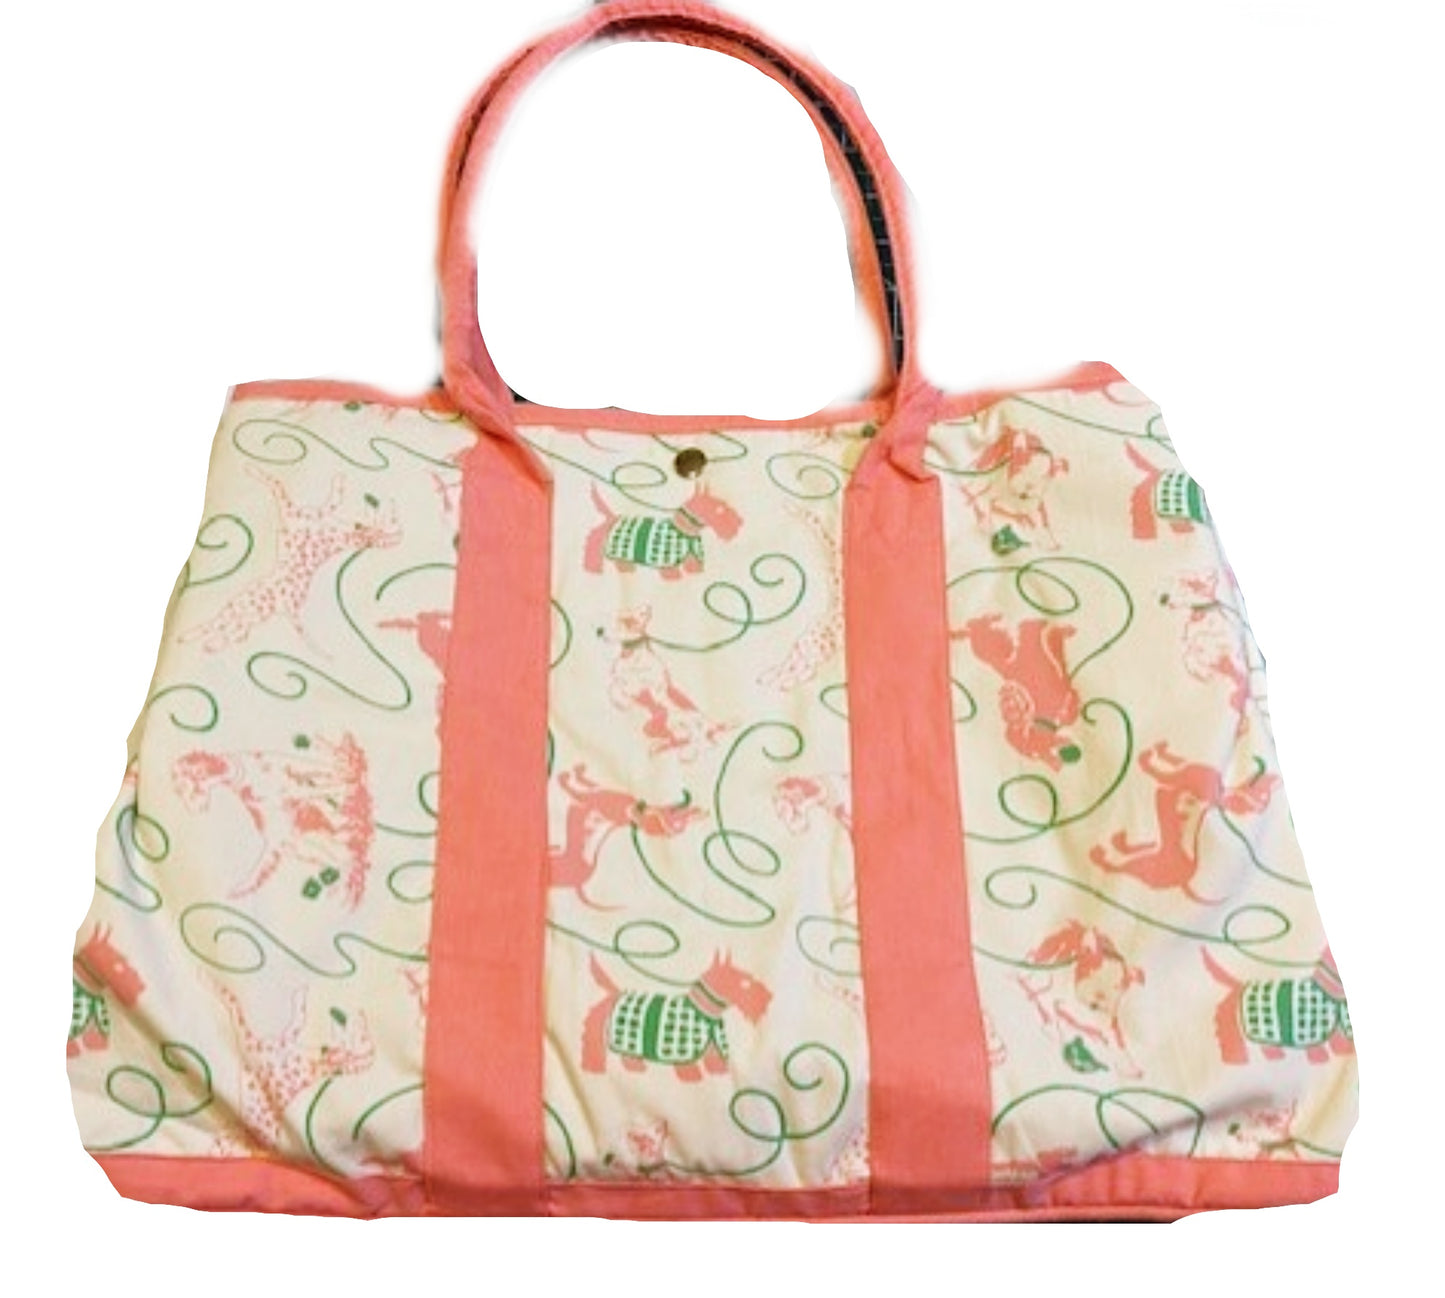 Large Diaper Bag or Tote Bags - made by Moda